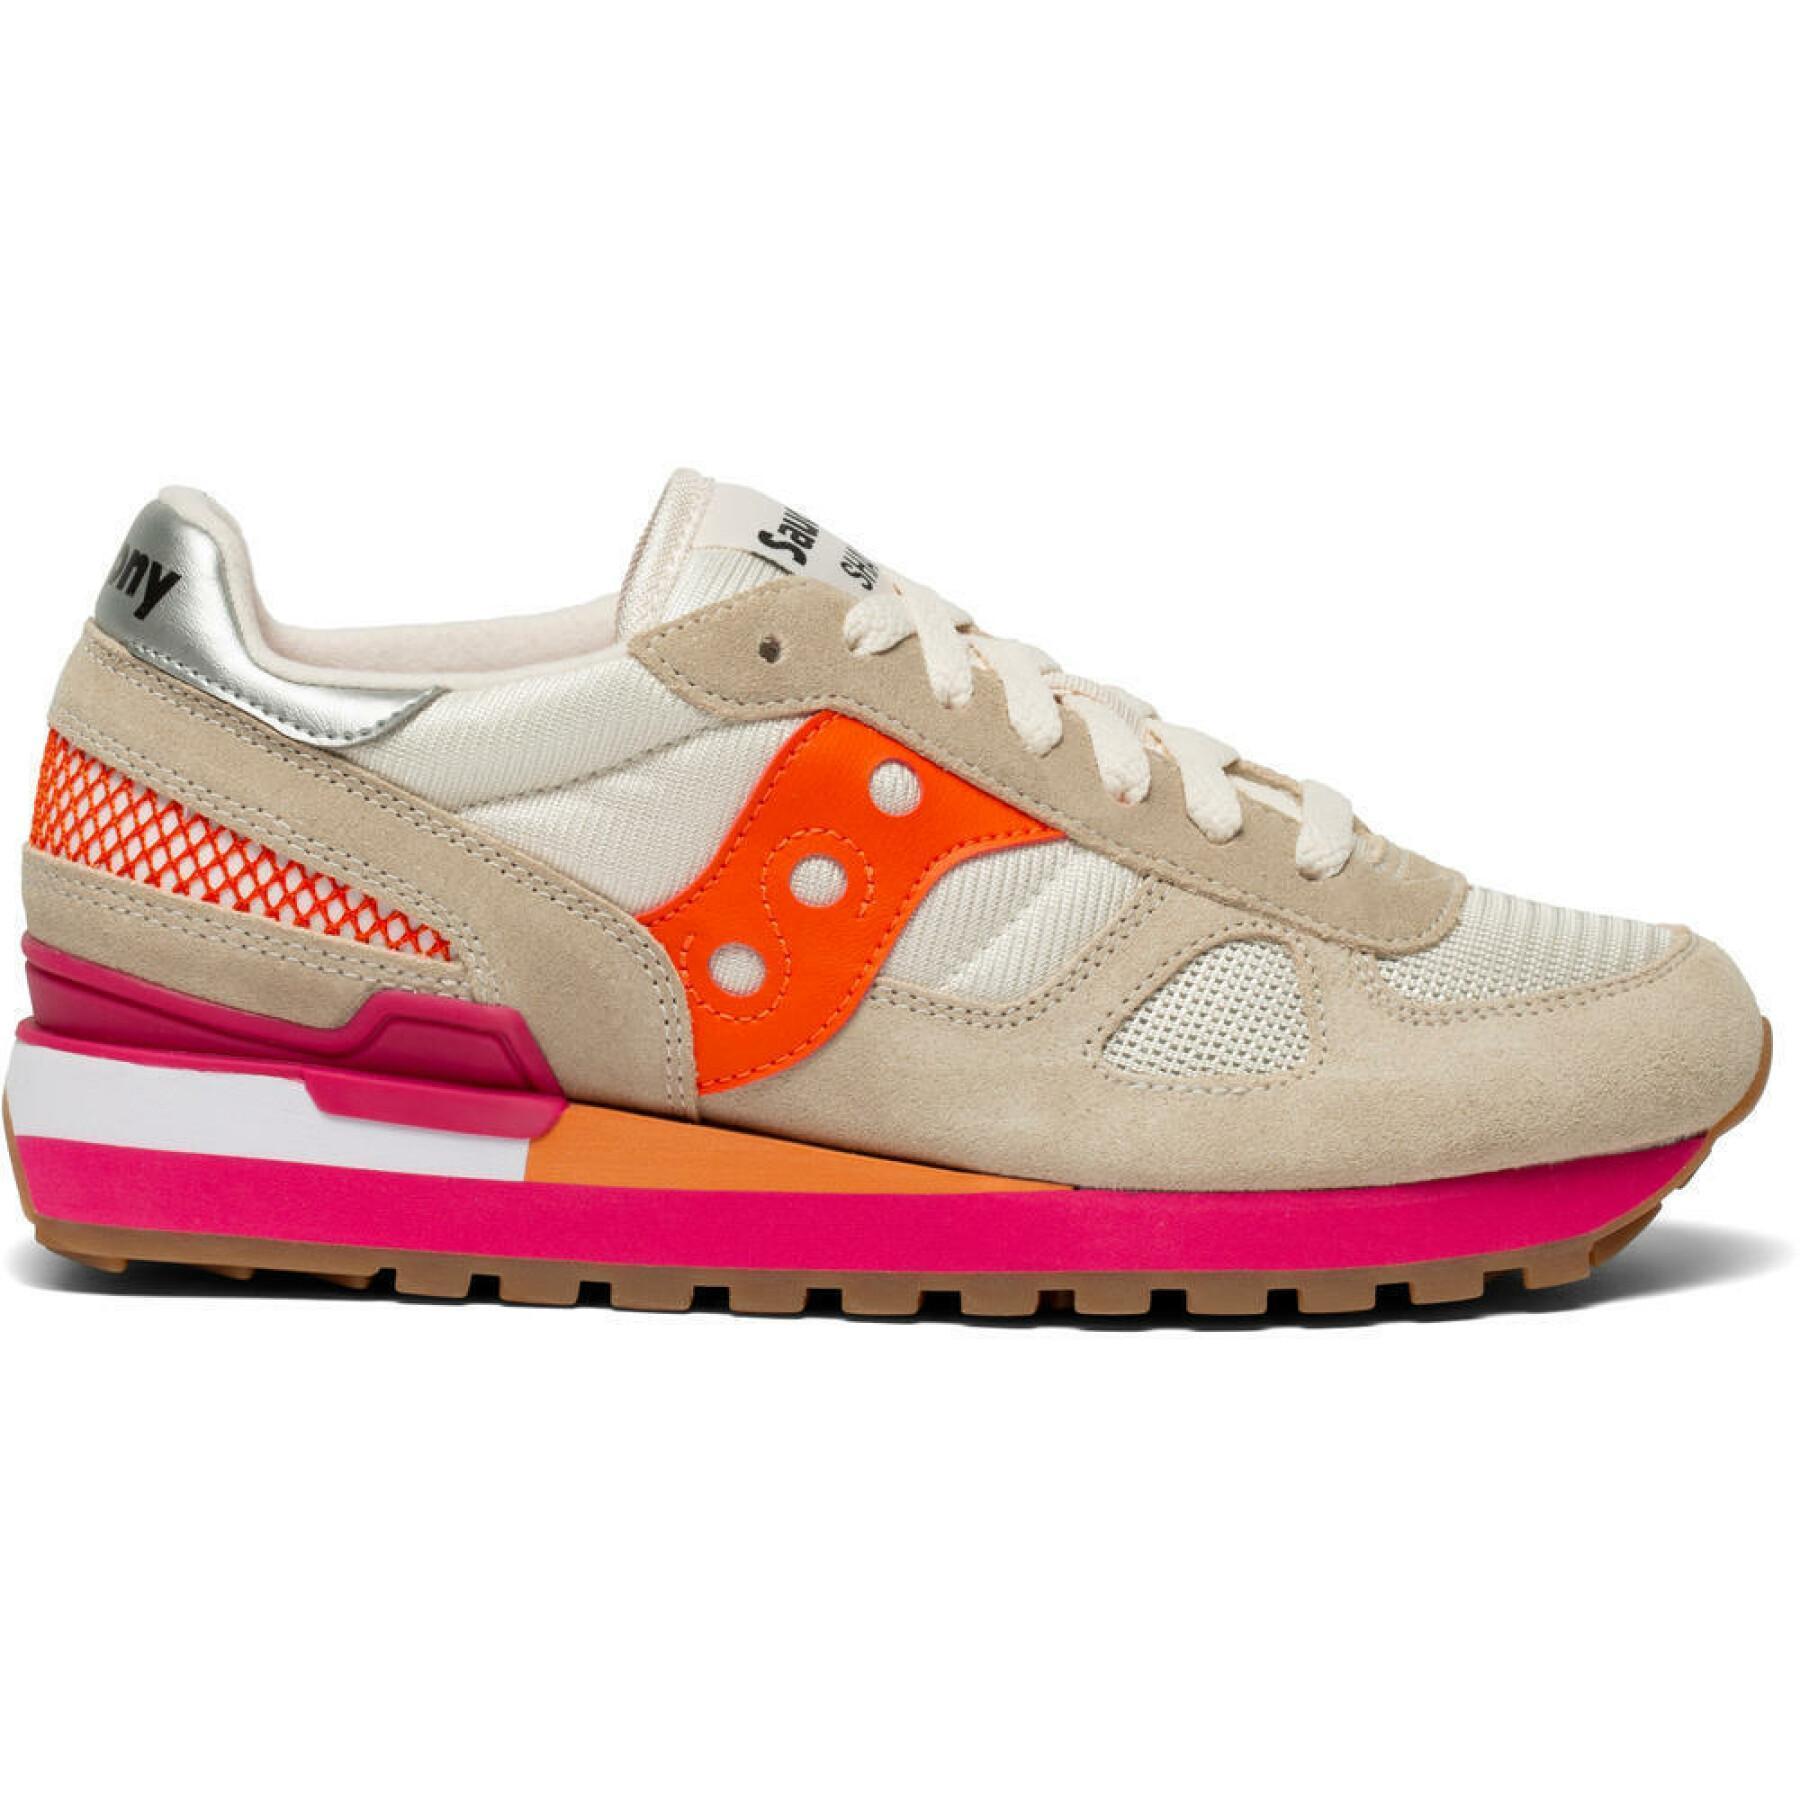 Baskets femme Saucony shadow original - Sneakers - Chaussures